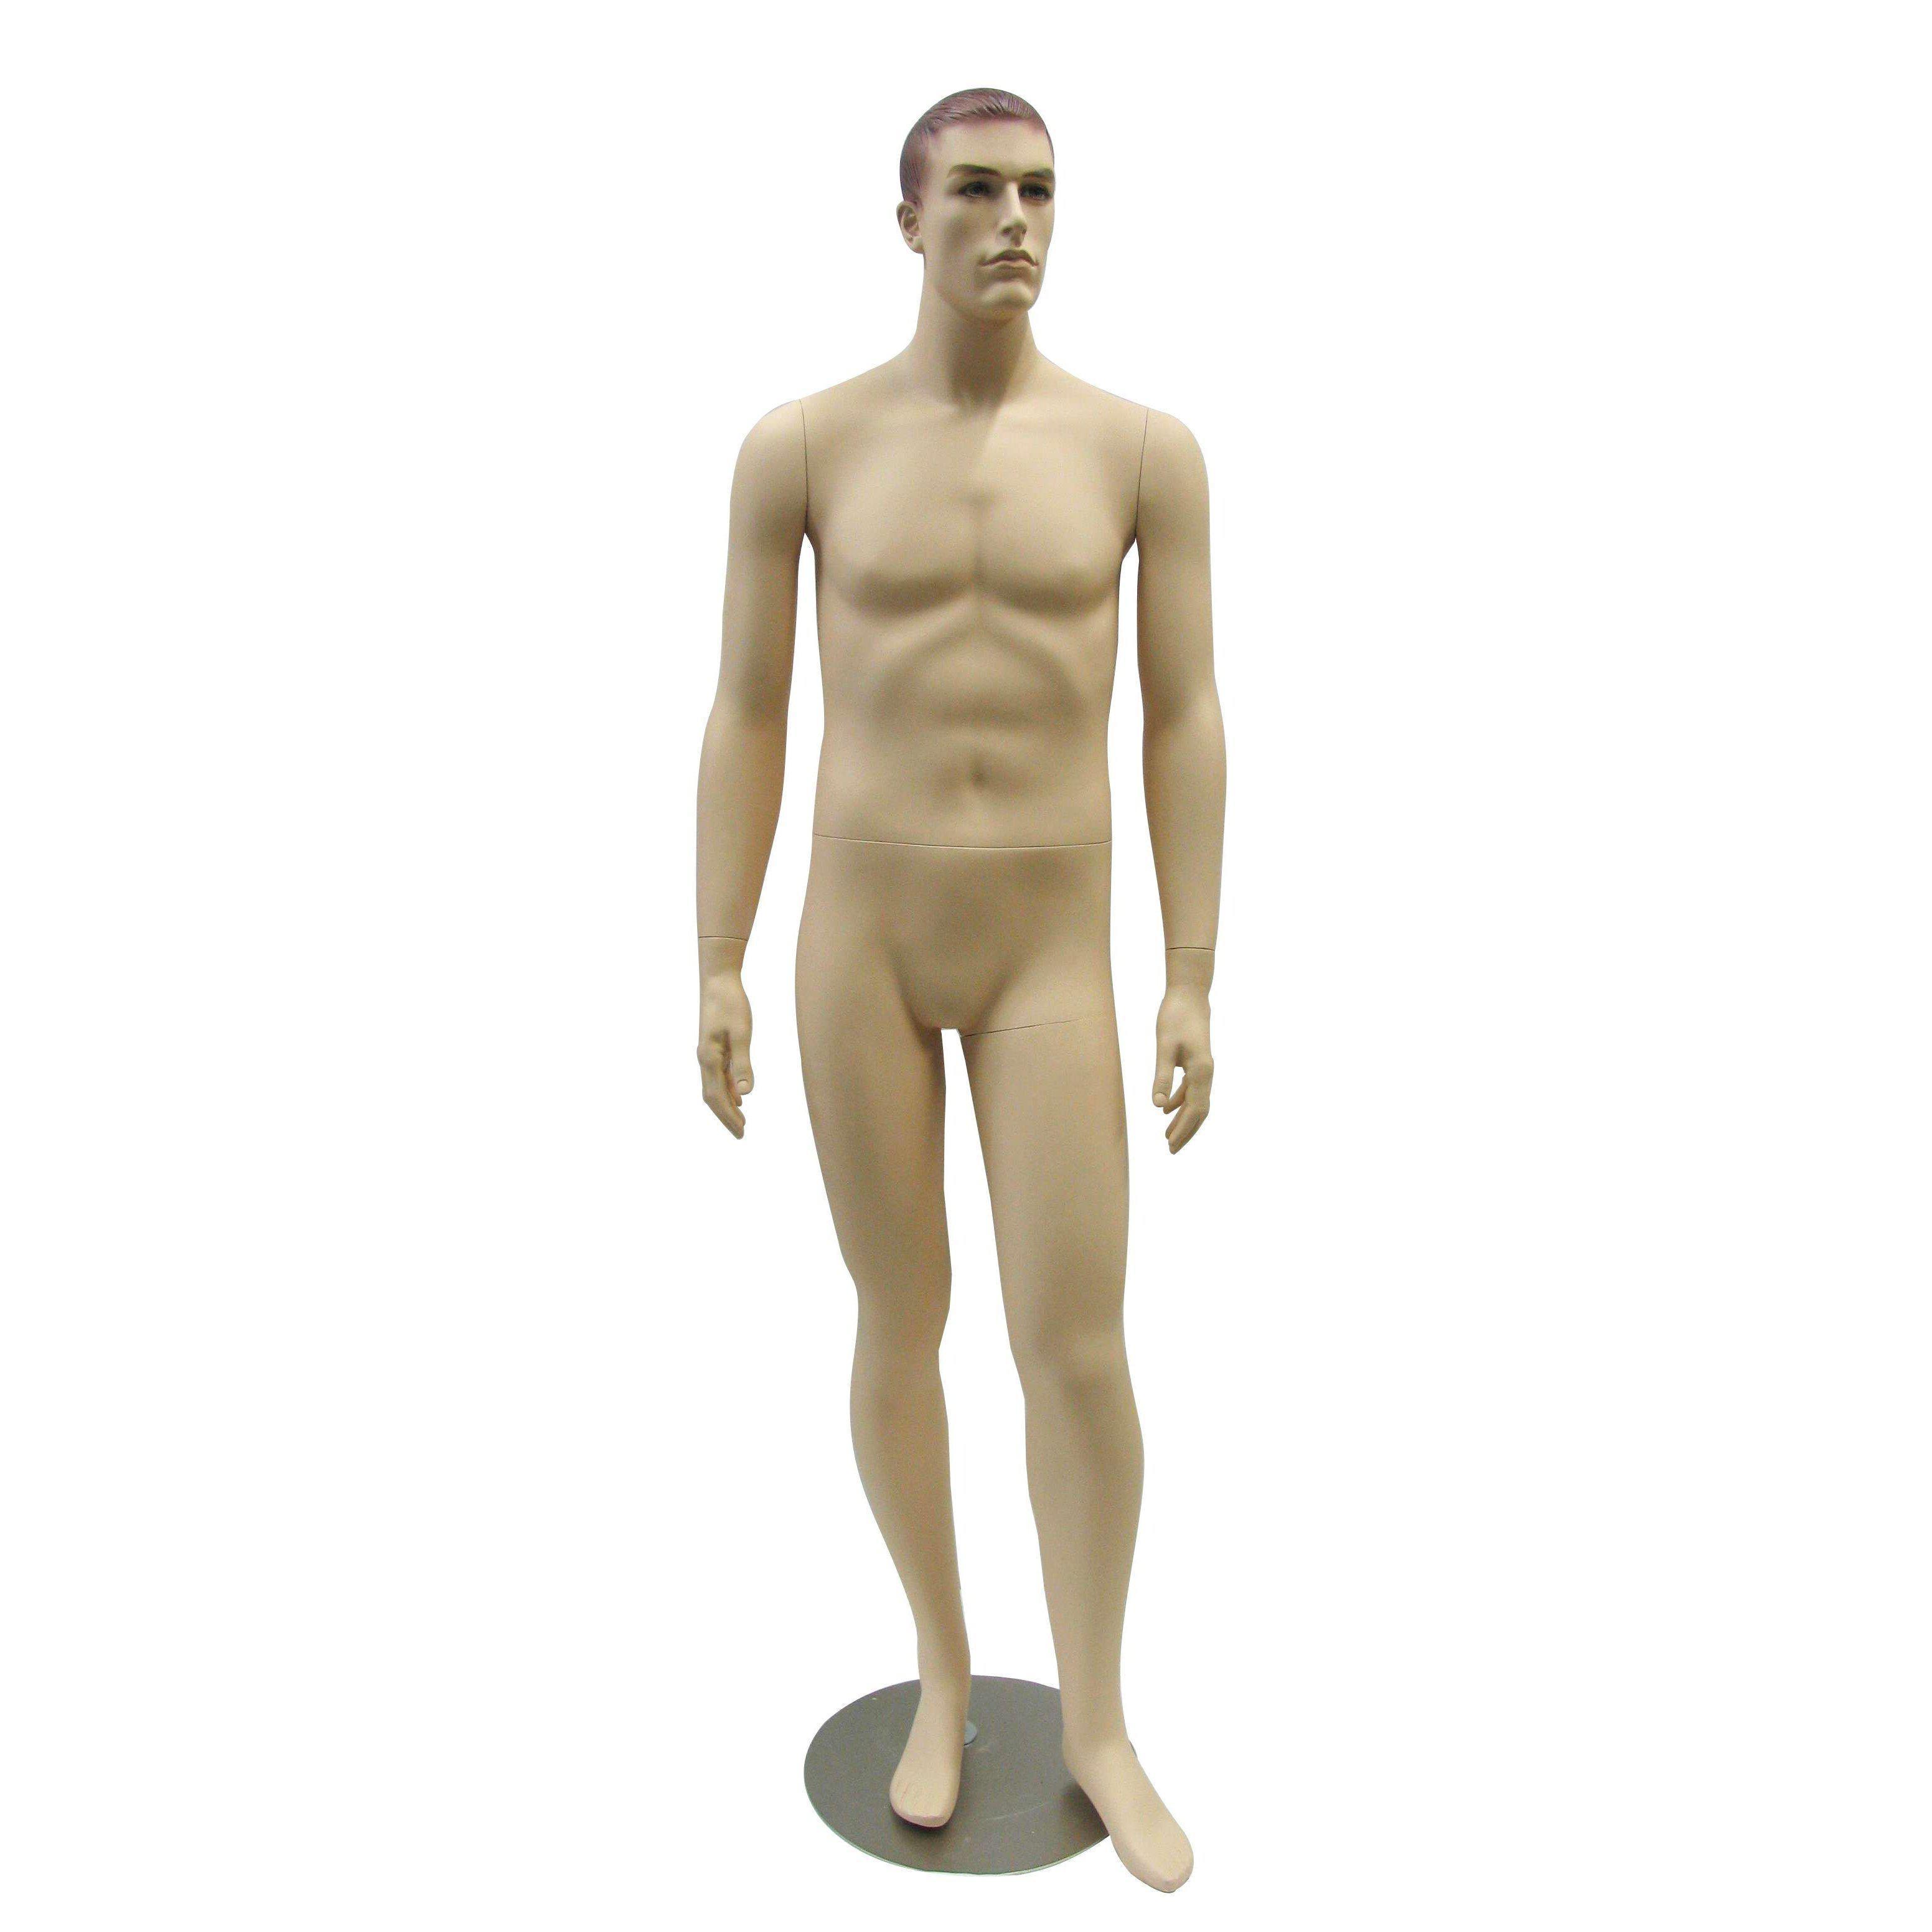 MN-175 V-Neck Male Fleshtone Mannequin Head Form with Realistic